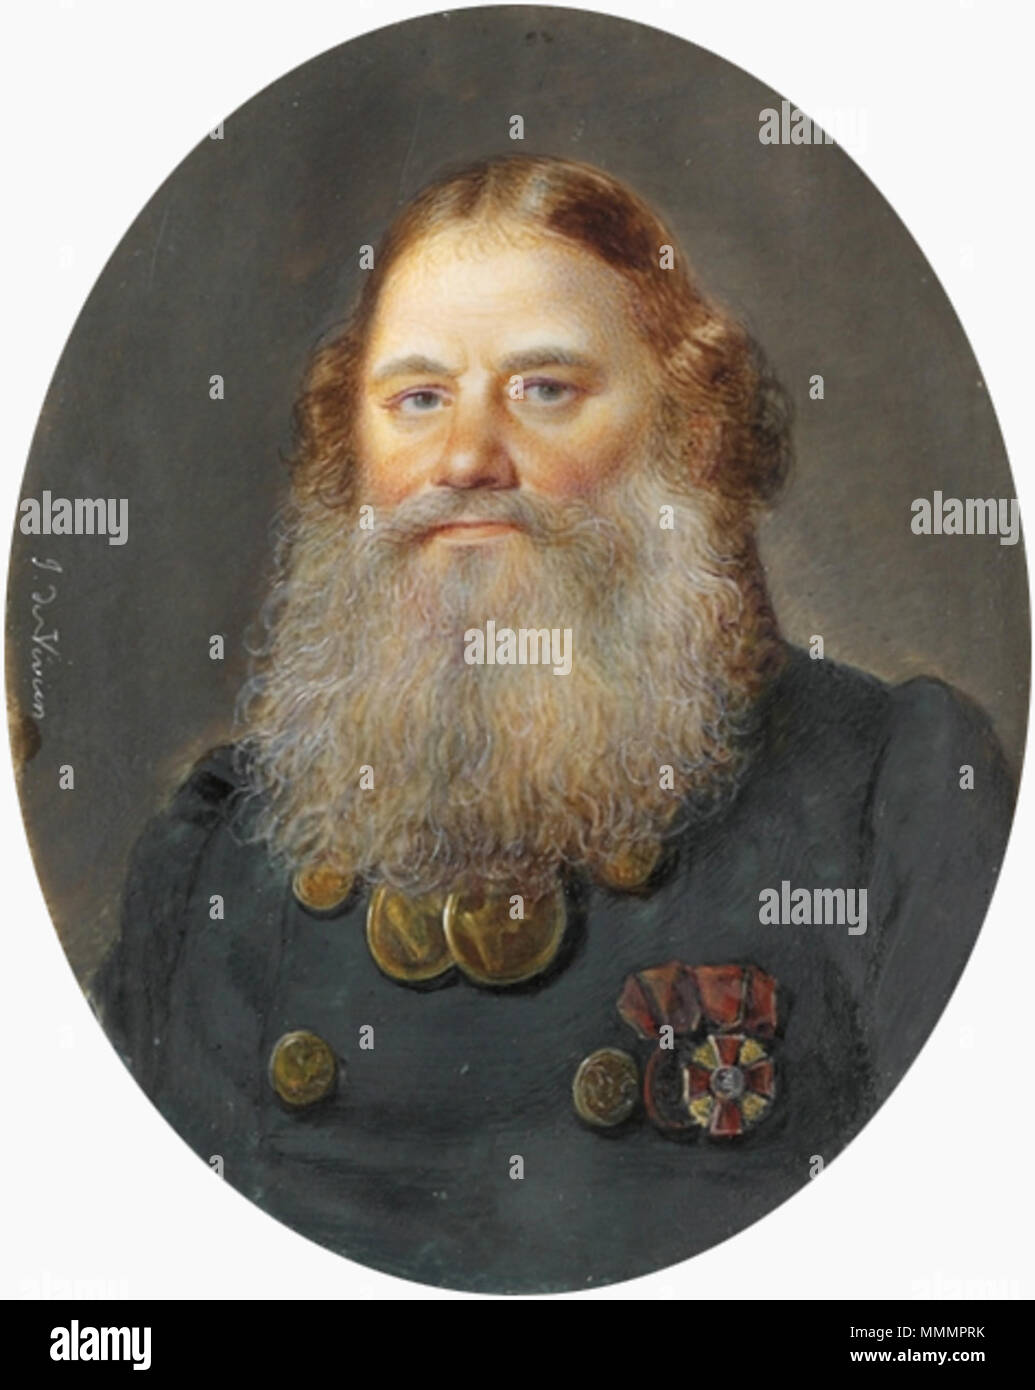 . English: JOSIF JOSIFOVICH DE VIVIEN DE CHÂTEAUBRUN (RUSSIAN, 1793-1852) Ilya Ivanovich Baikov (1768-1838), in double-breasted loden green coat with gilt buttons, wearing the badges of the Imperial Russian Order of St. Anne (3rd class), the bronze medal for the Campaign of 1812 with the ribbon of St. Anne and, around his neck, two presentation medals for Zeal from Tsar Alexander I, long red hair and grey beard signed 'J. de Vivien' (mid left) on ivory oval, 3 1/8 in. (80 mm.) high, rectangular ormolu frame with shell spandrels  . 19th century. JOSIF JOSIFOVICH DE VIVIEN DE CHÂTEAUBRUN (RUSSIA Stock Photo